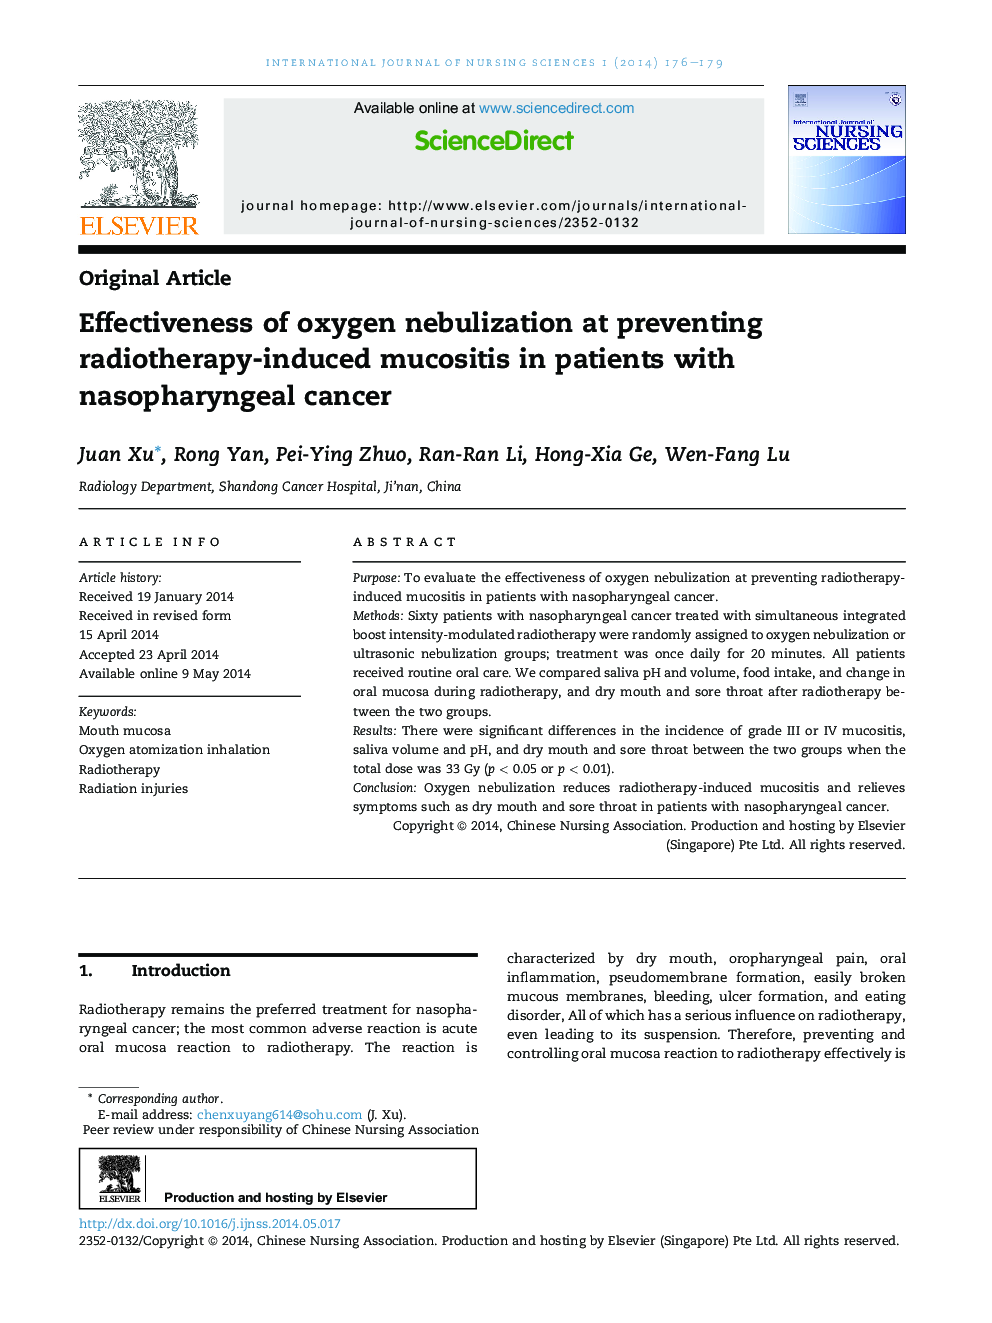 Effectiveness of oxygen nebulization at preventing radiotherapy-induced mucositis in patients with nasopharyngeal cancer 